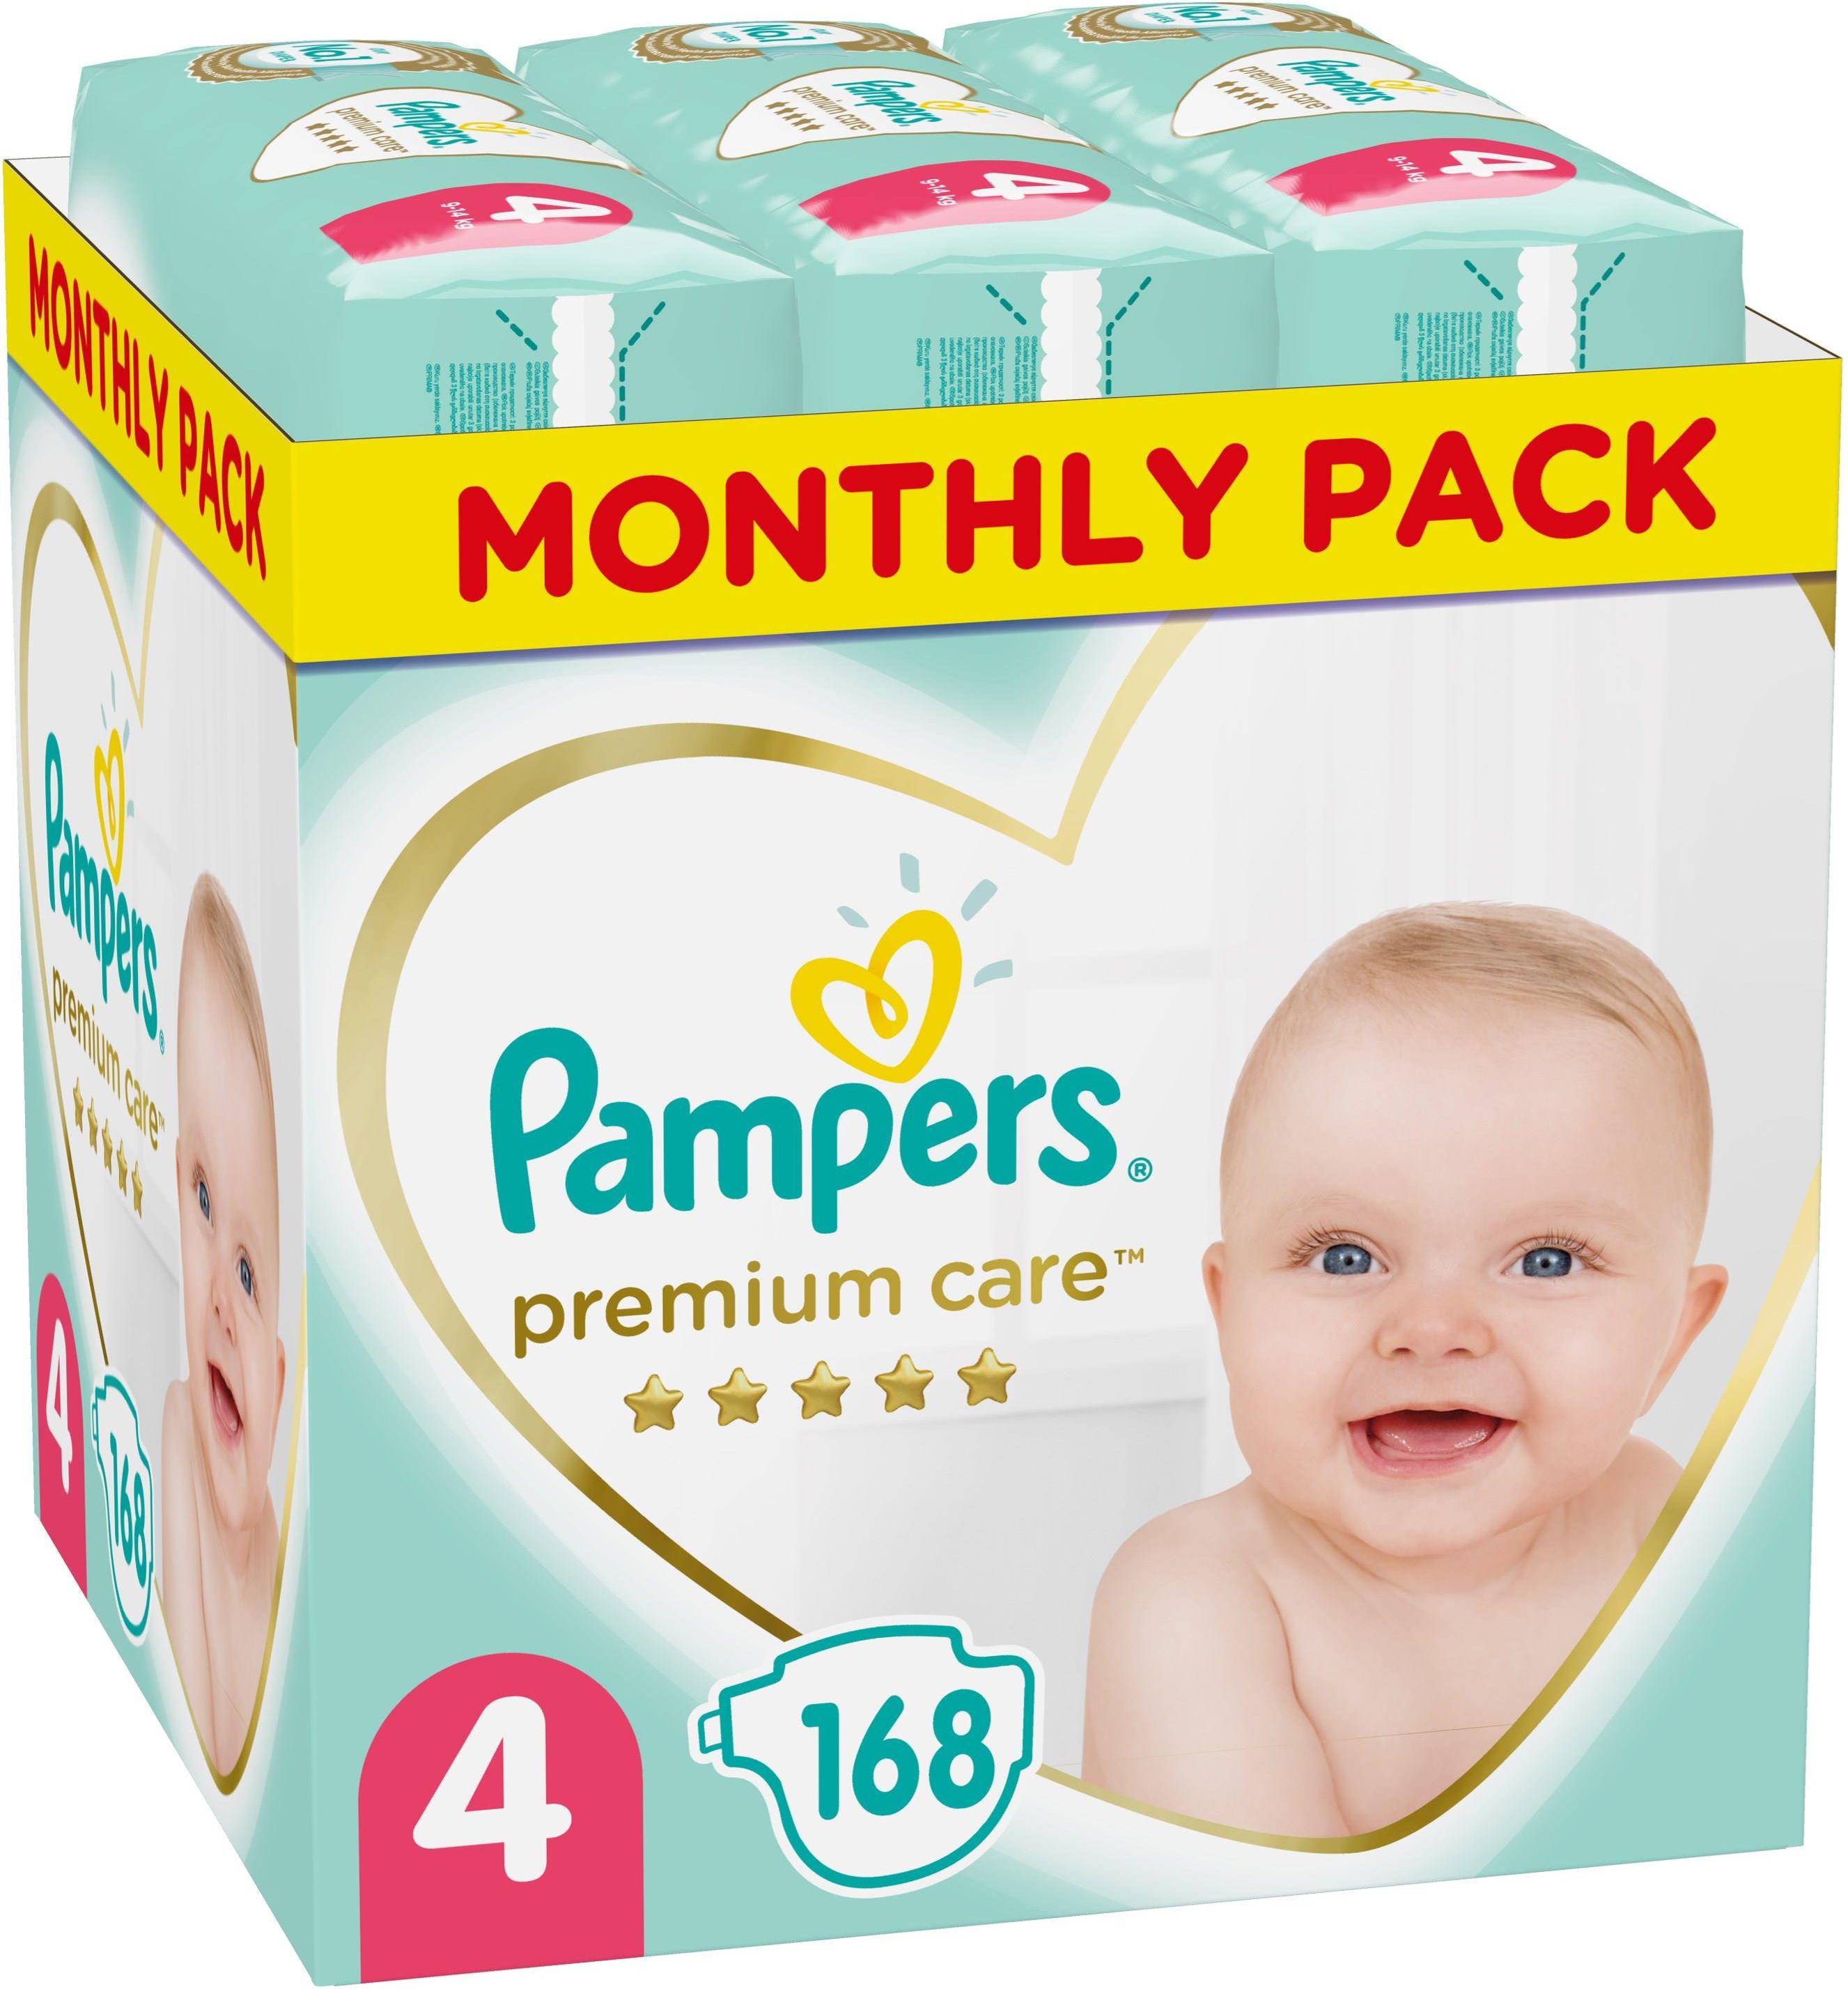 pampers pure cenel